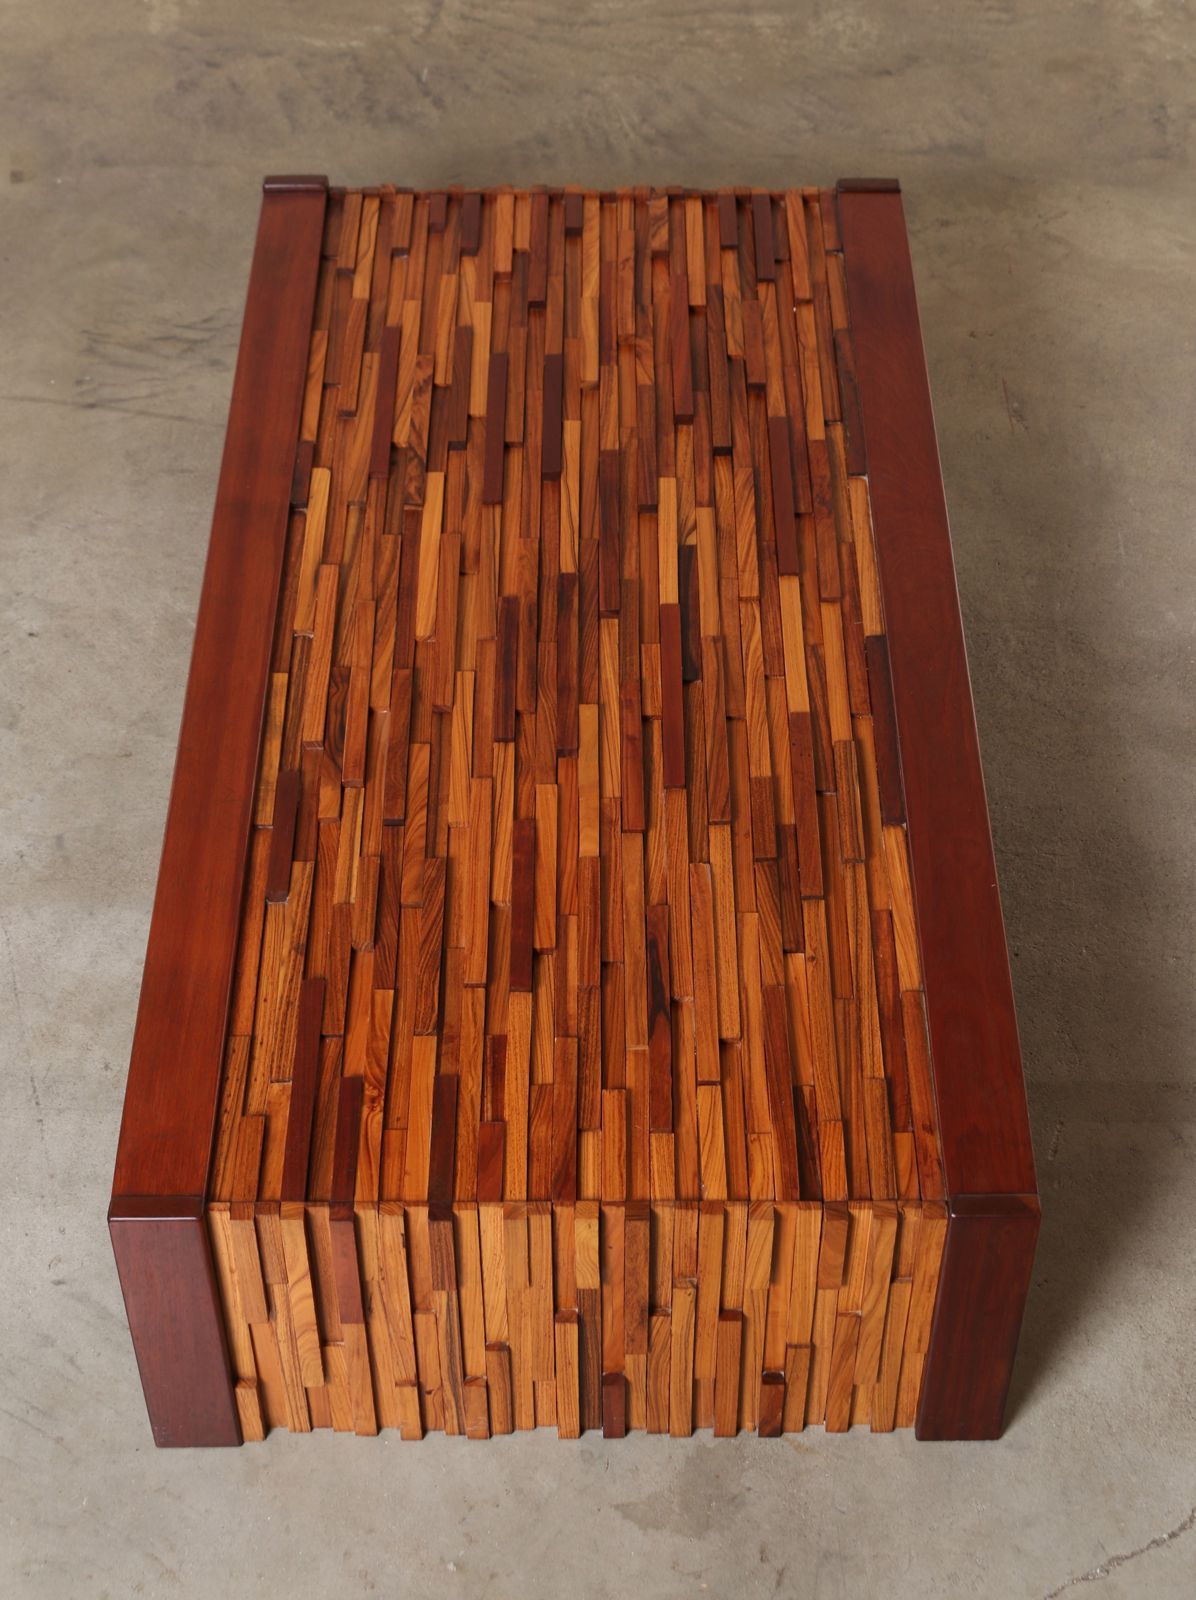 Stained Percival Lafer Jacaranda, Rosewood and Glass Coffee Table, Brazil, 1960s